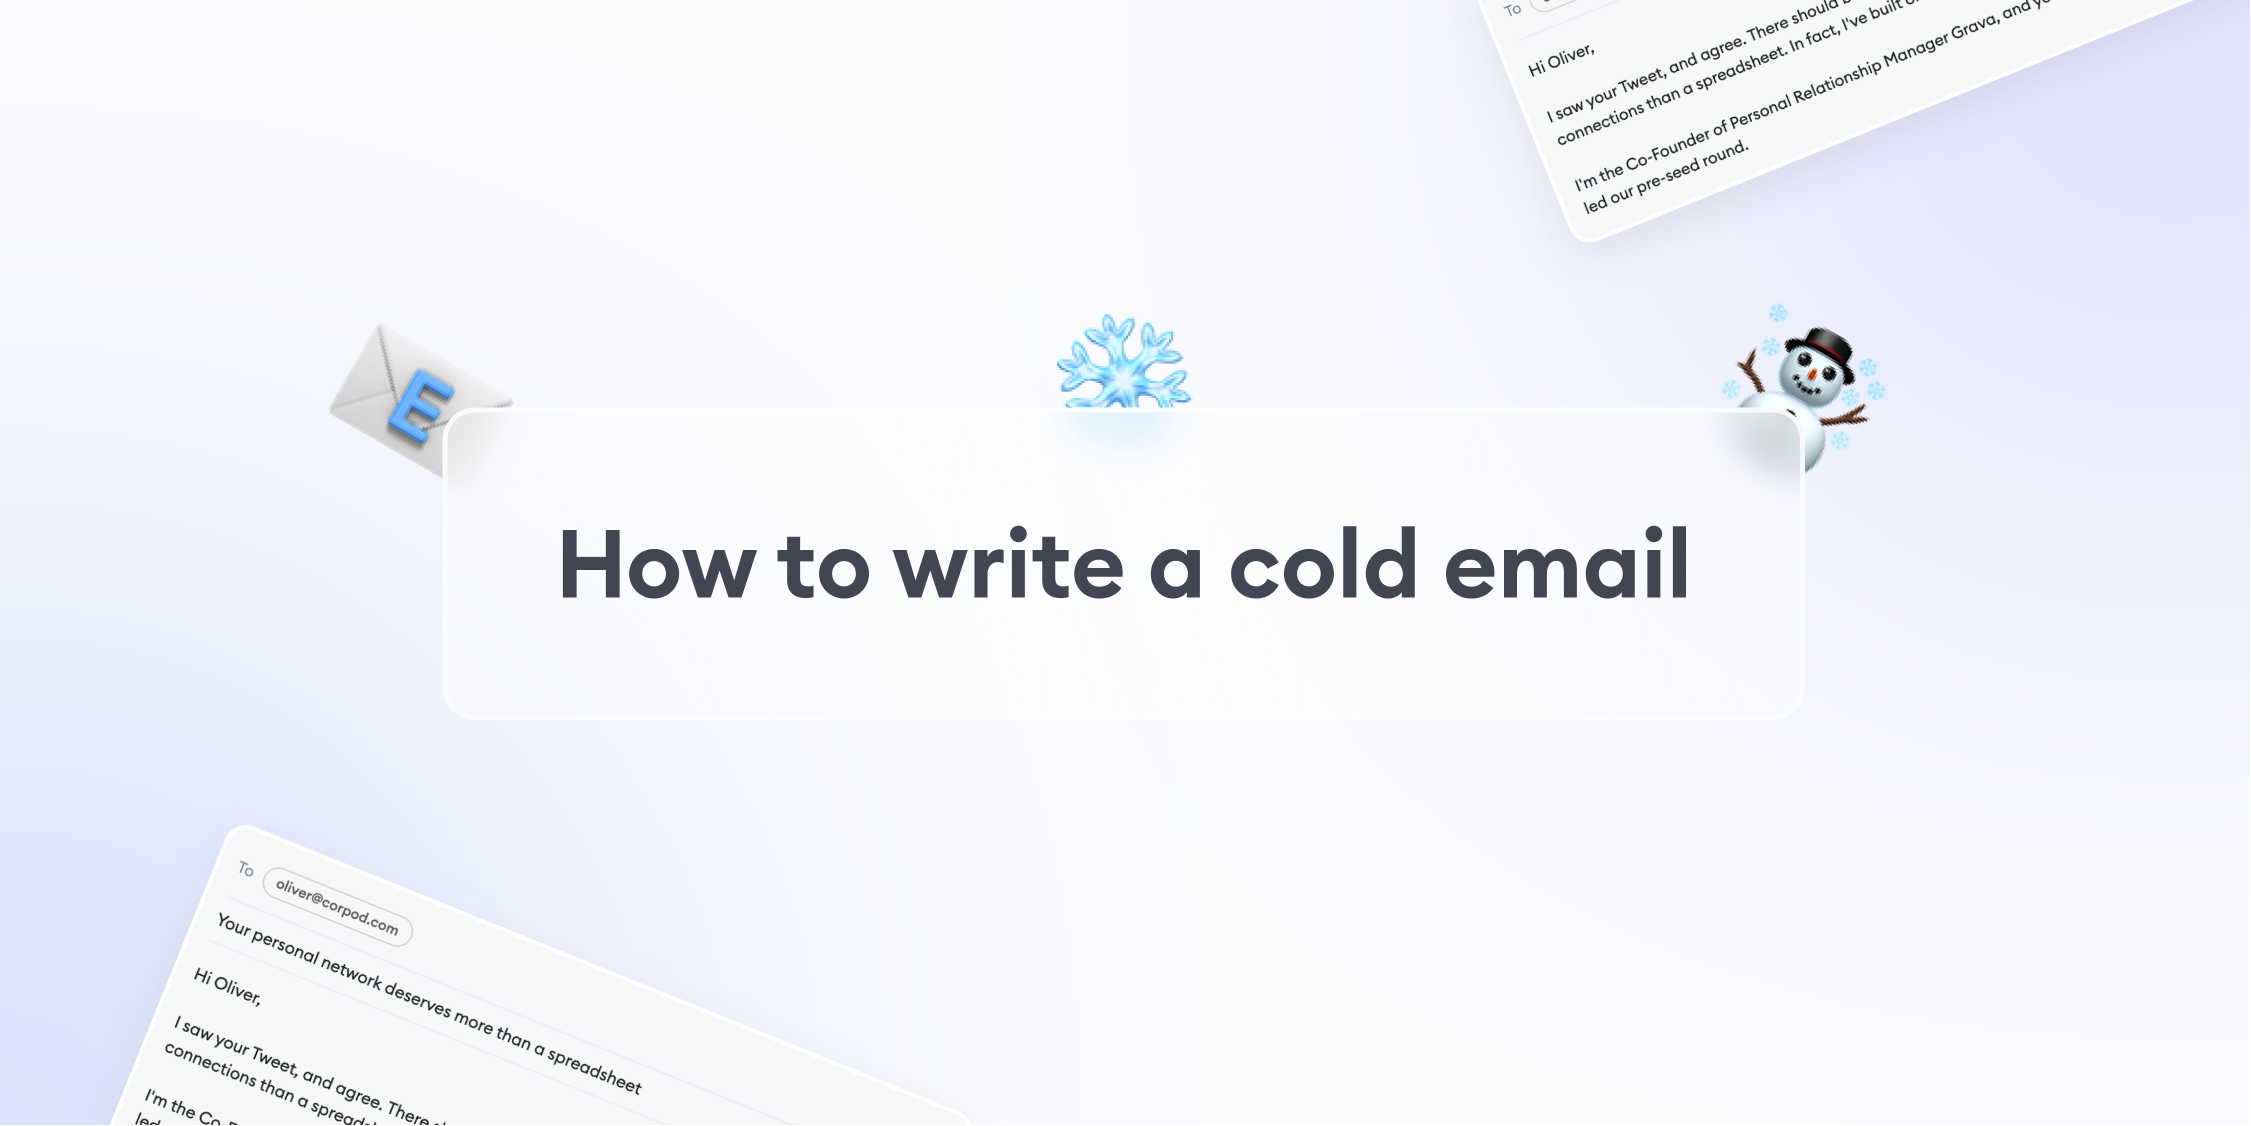 How to write a cold email – A step-by-step guide